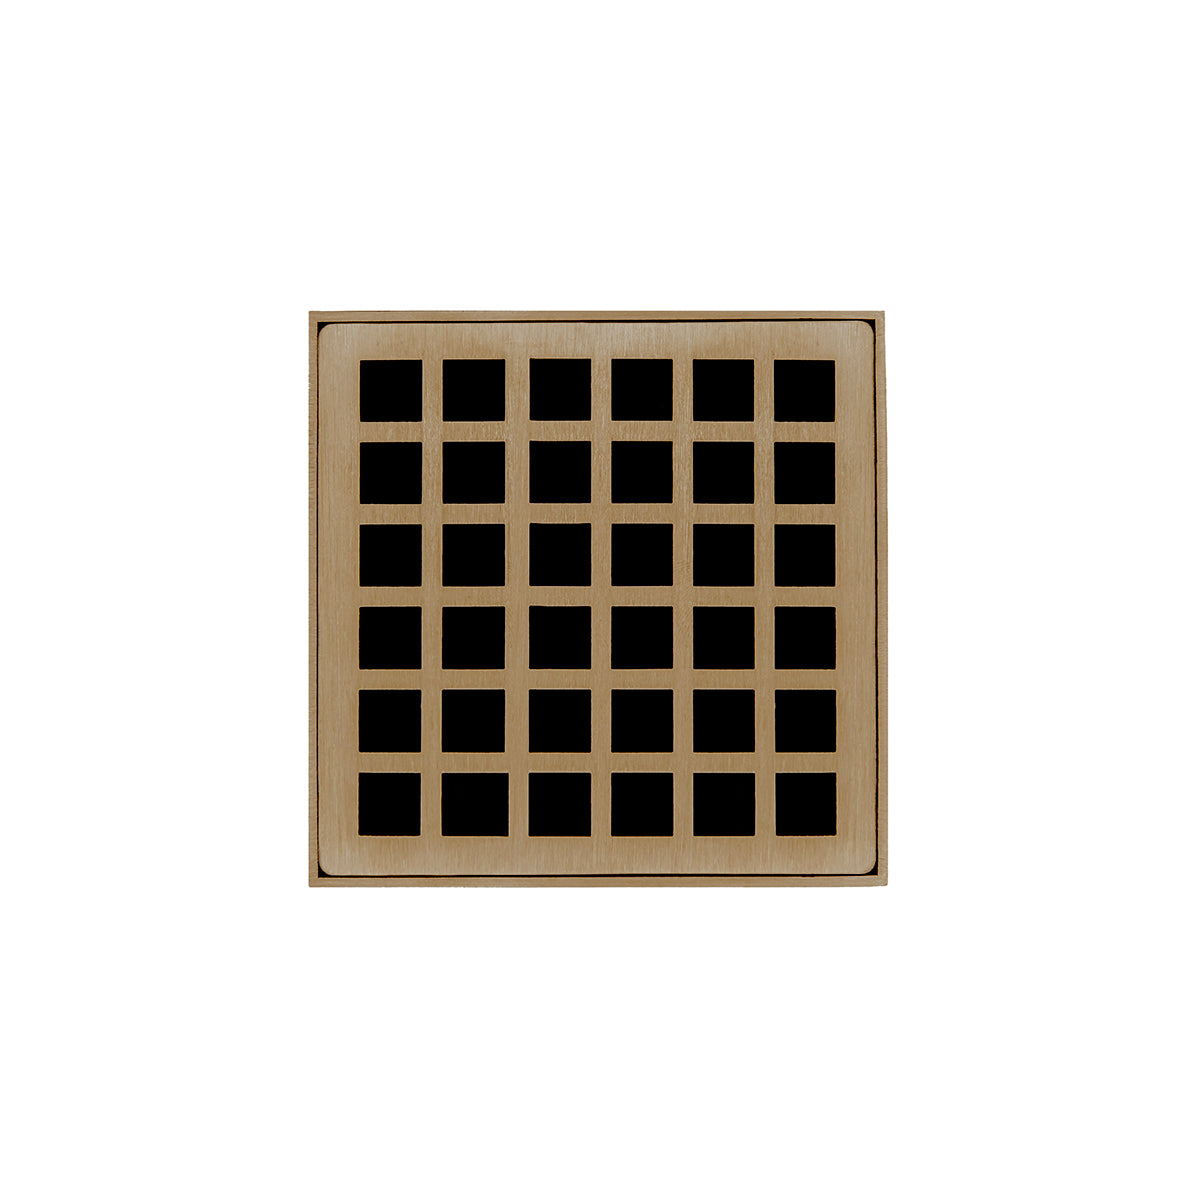 Infinity Drain 4" x 4" QD 4 Premium Center Drain Kit with Squares Pattern Decorative Plate with Cast Iron Drain Body, 2" Outlet